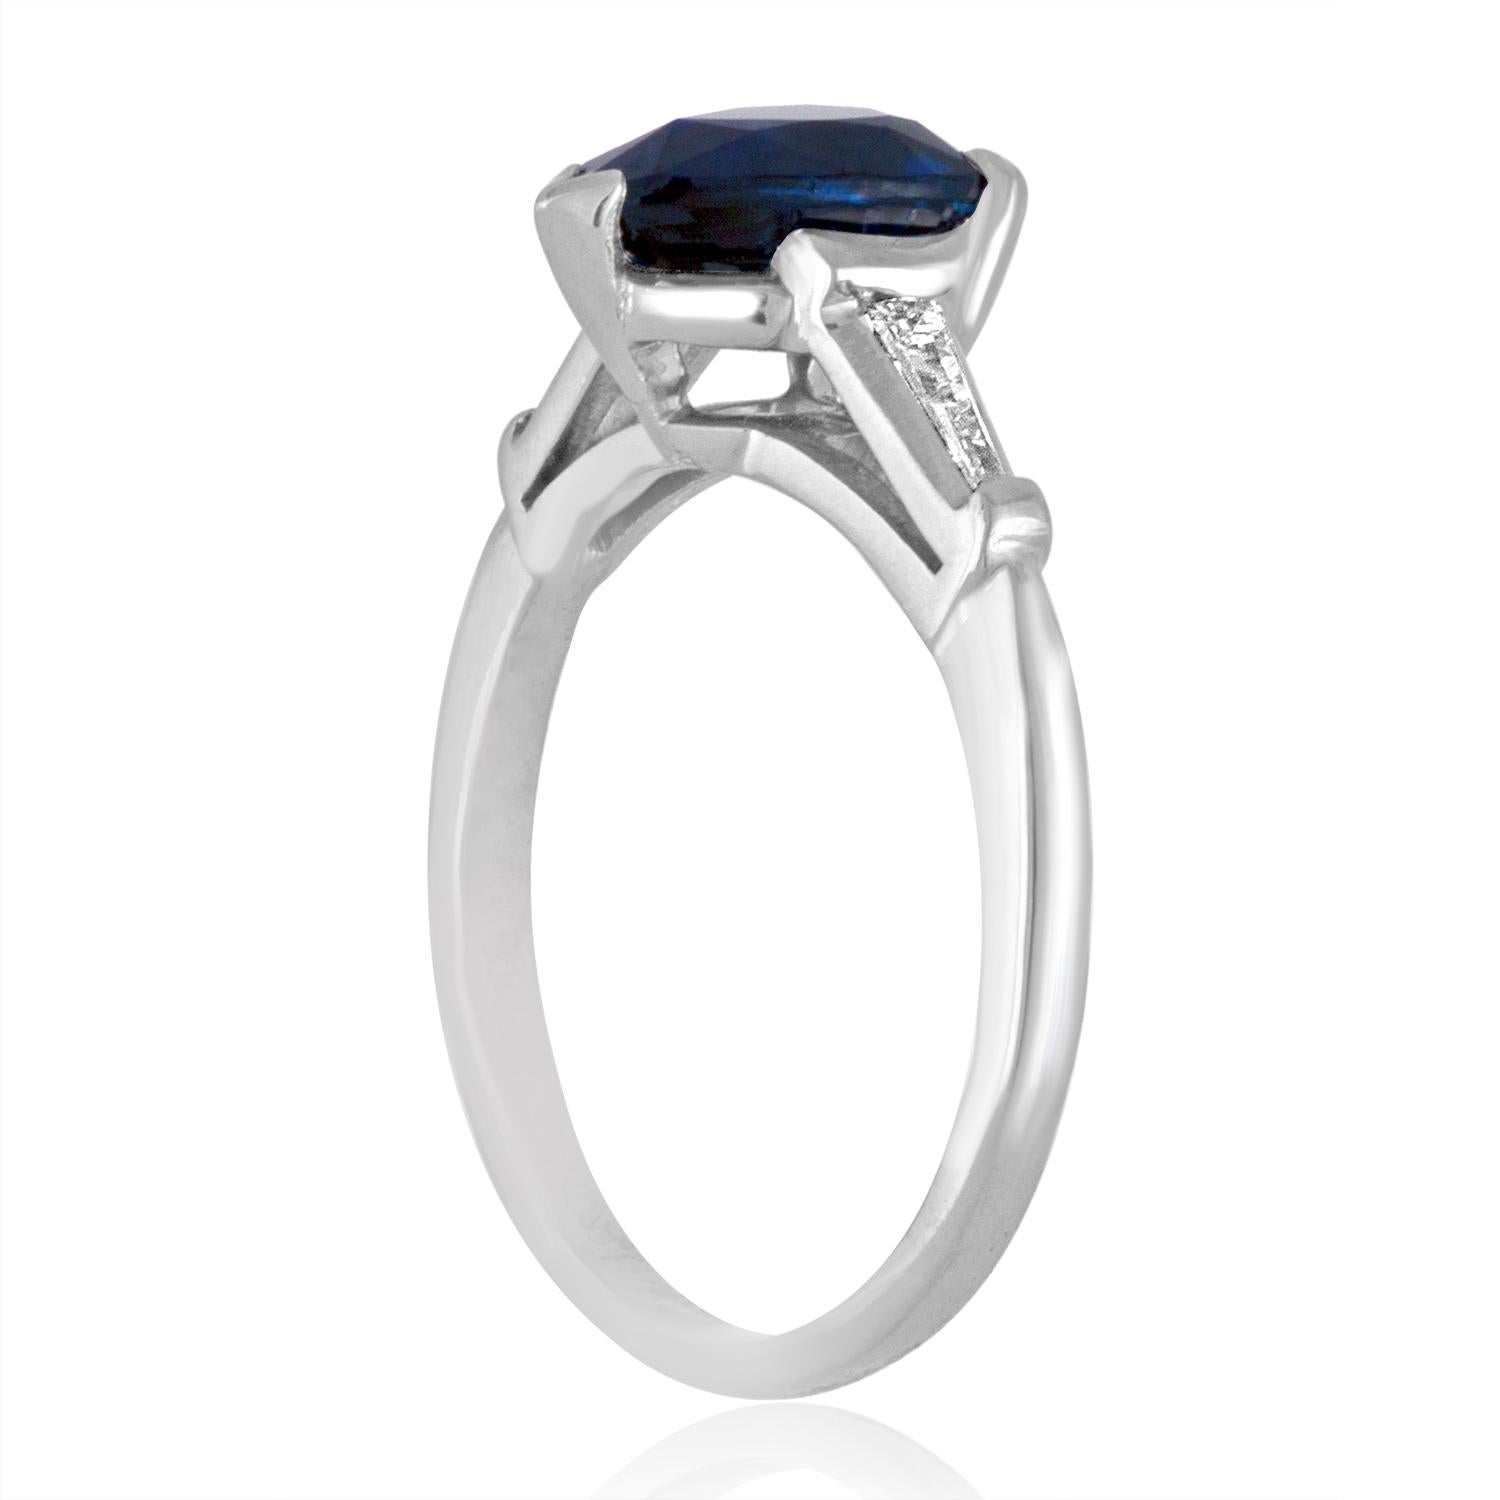 Classic Pear Shaped Ring with Baguette Side Stones
The ring is Platinum
The Center Stone is a Pear Shape Sapphire 2.01 Carats
The Sapphire is Certified By LAPIS.
The stone is heated.
There are 0.25 Carats in Diamonds F VS
The ring is a size 6.25,